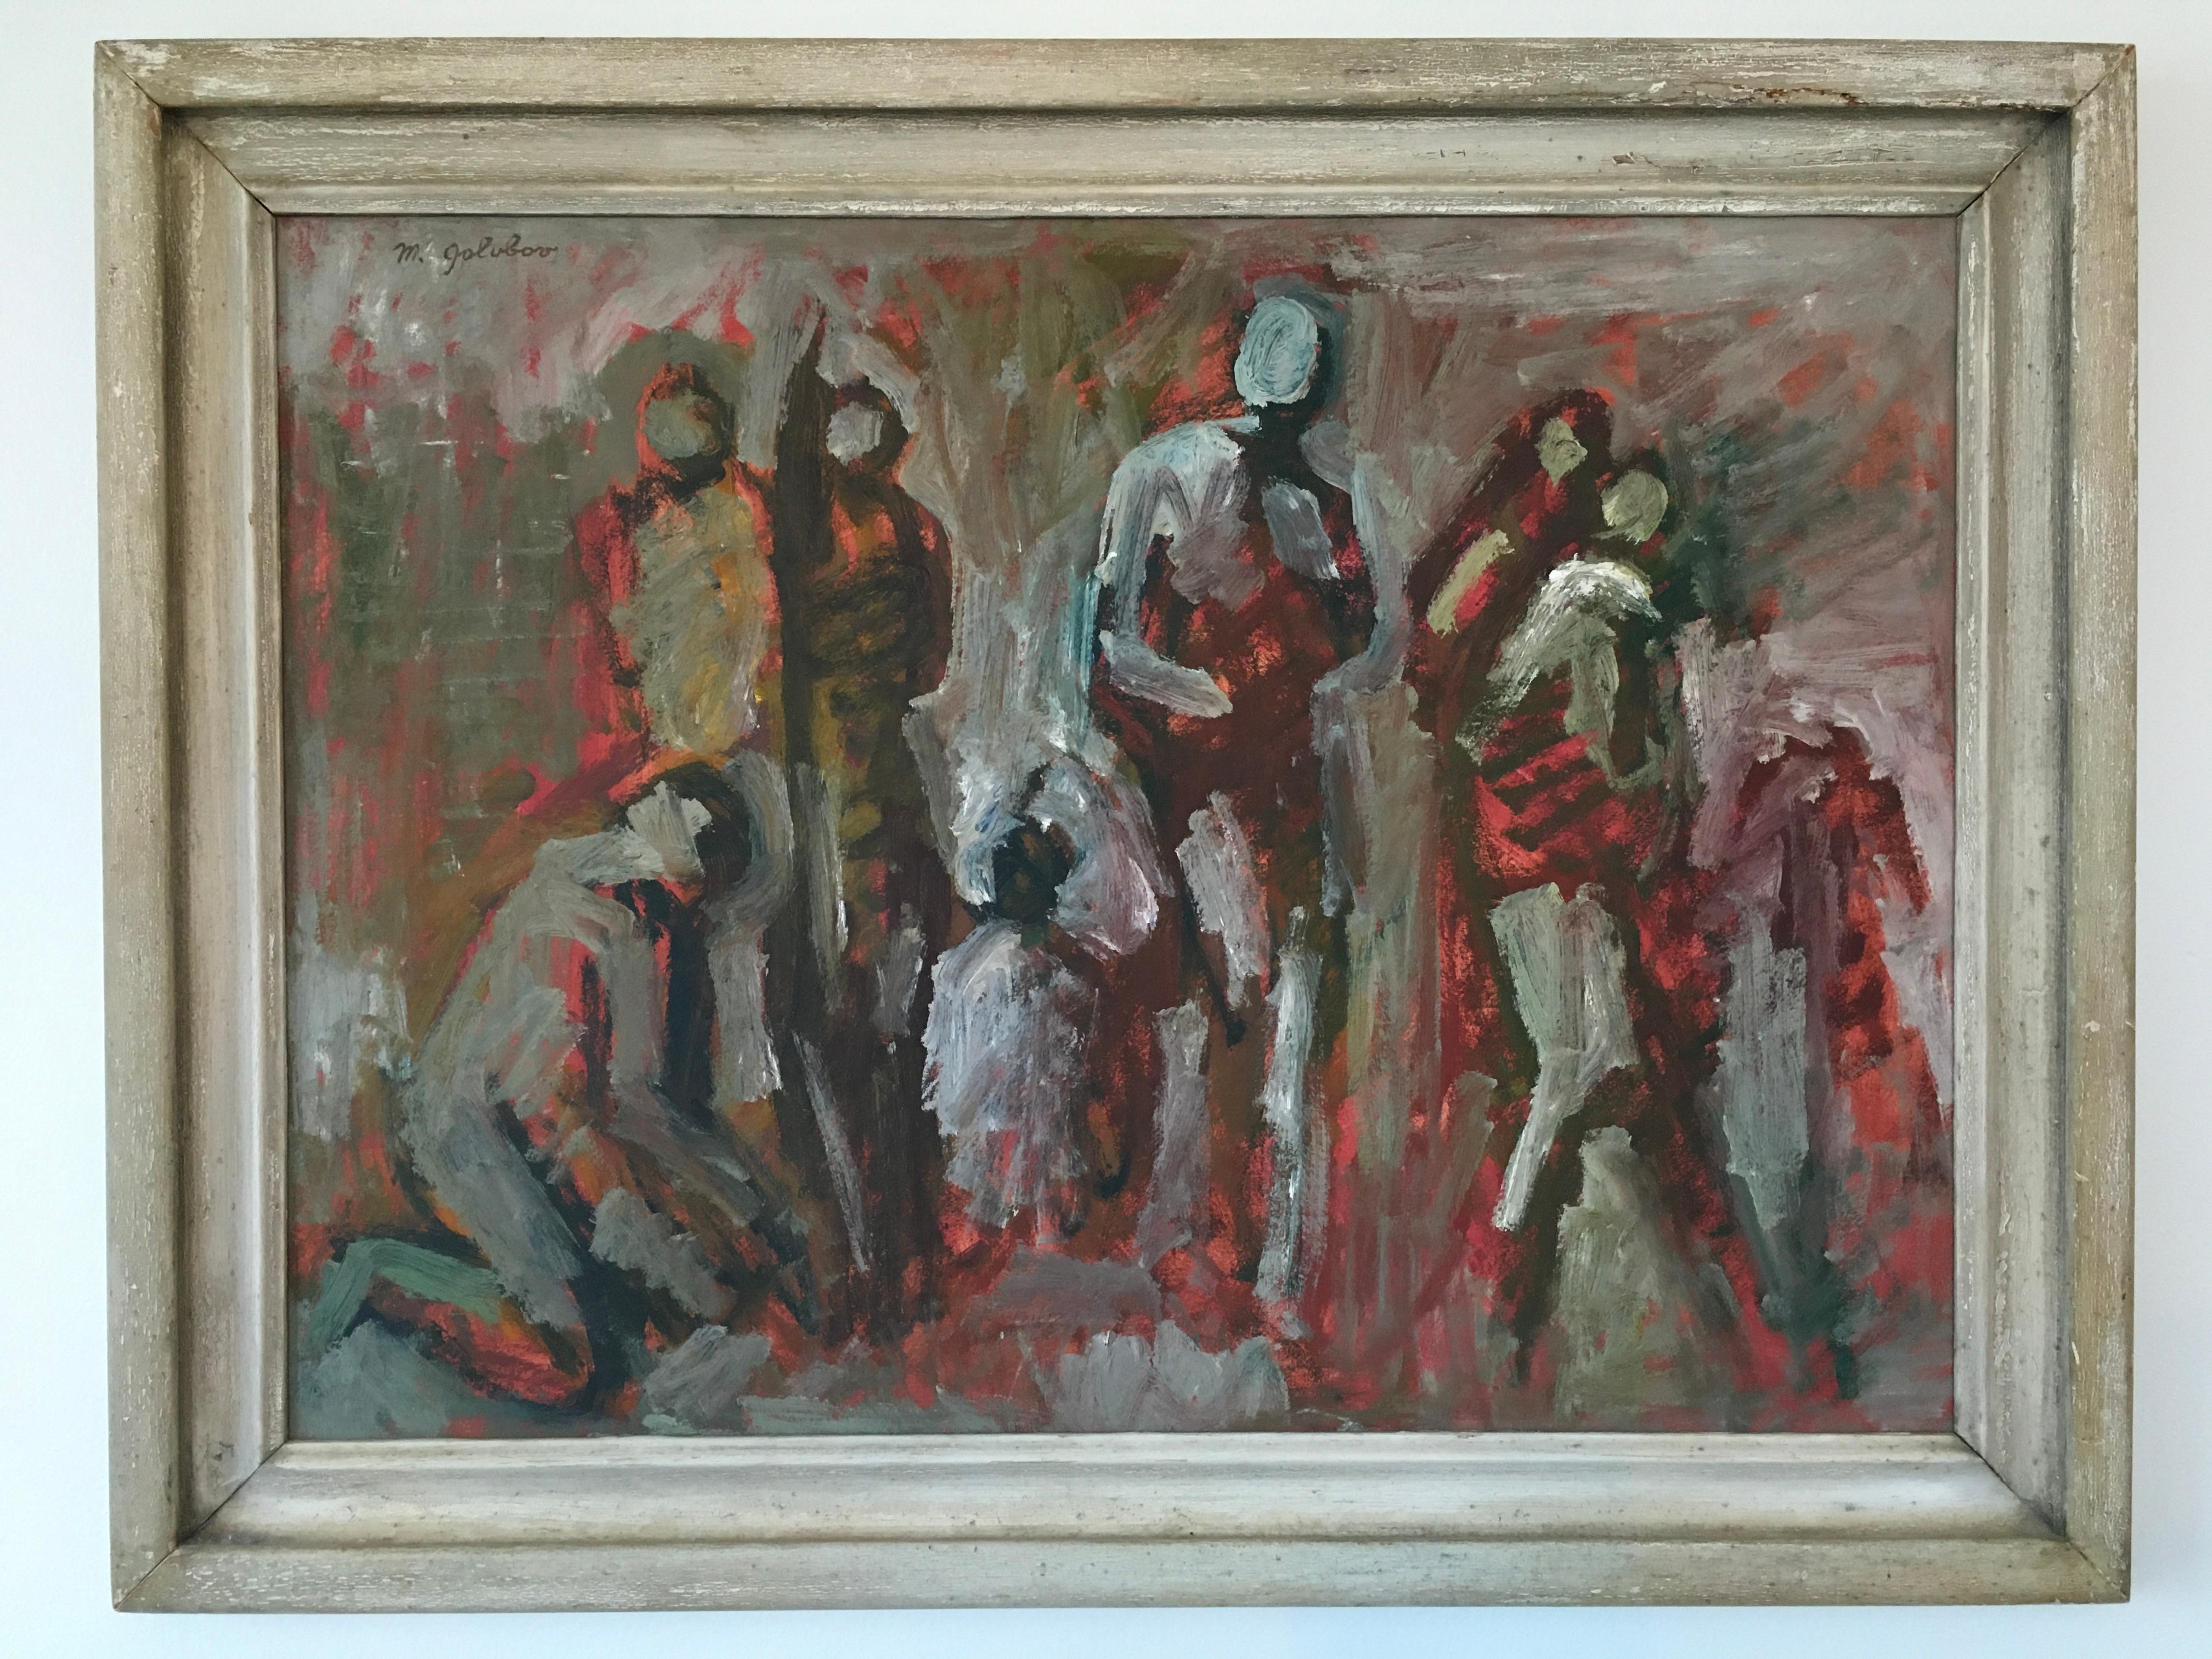 Untitled Figures, by Maurice Golubov, Oil on Board Painting